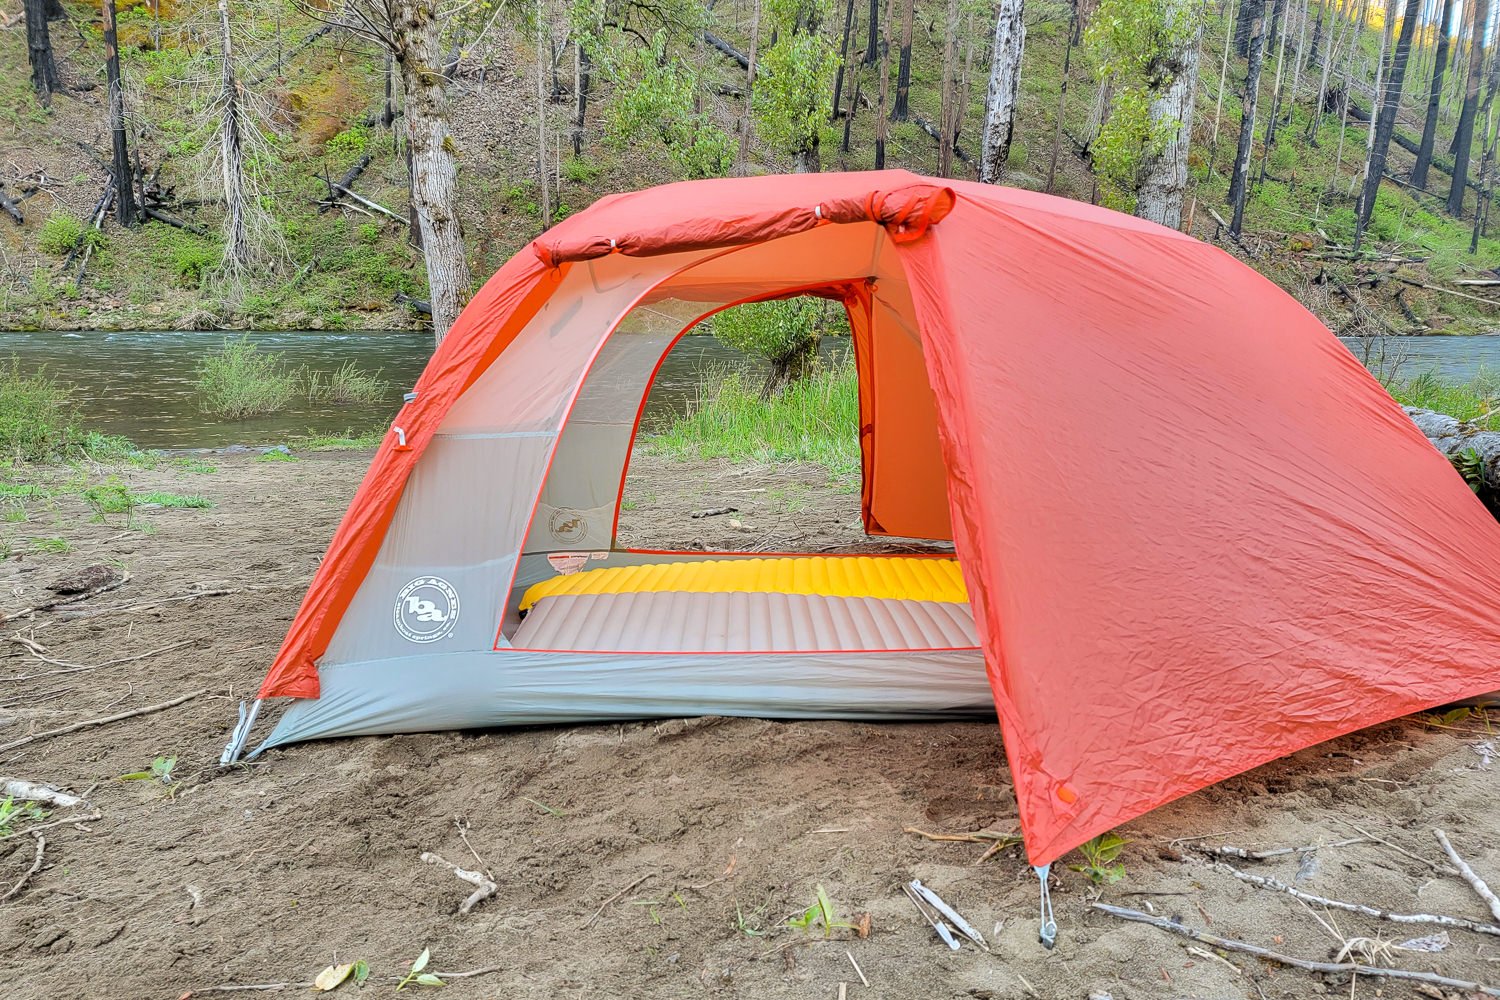 Looking through the double doors of the Big Agnes Copper Spur tent